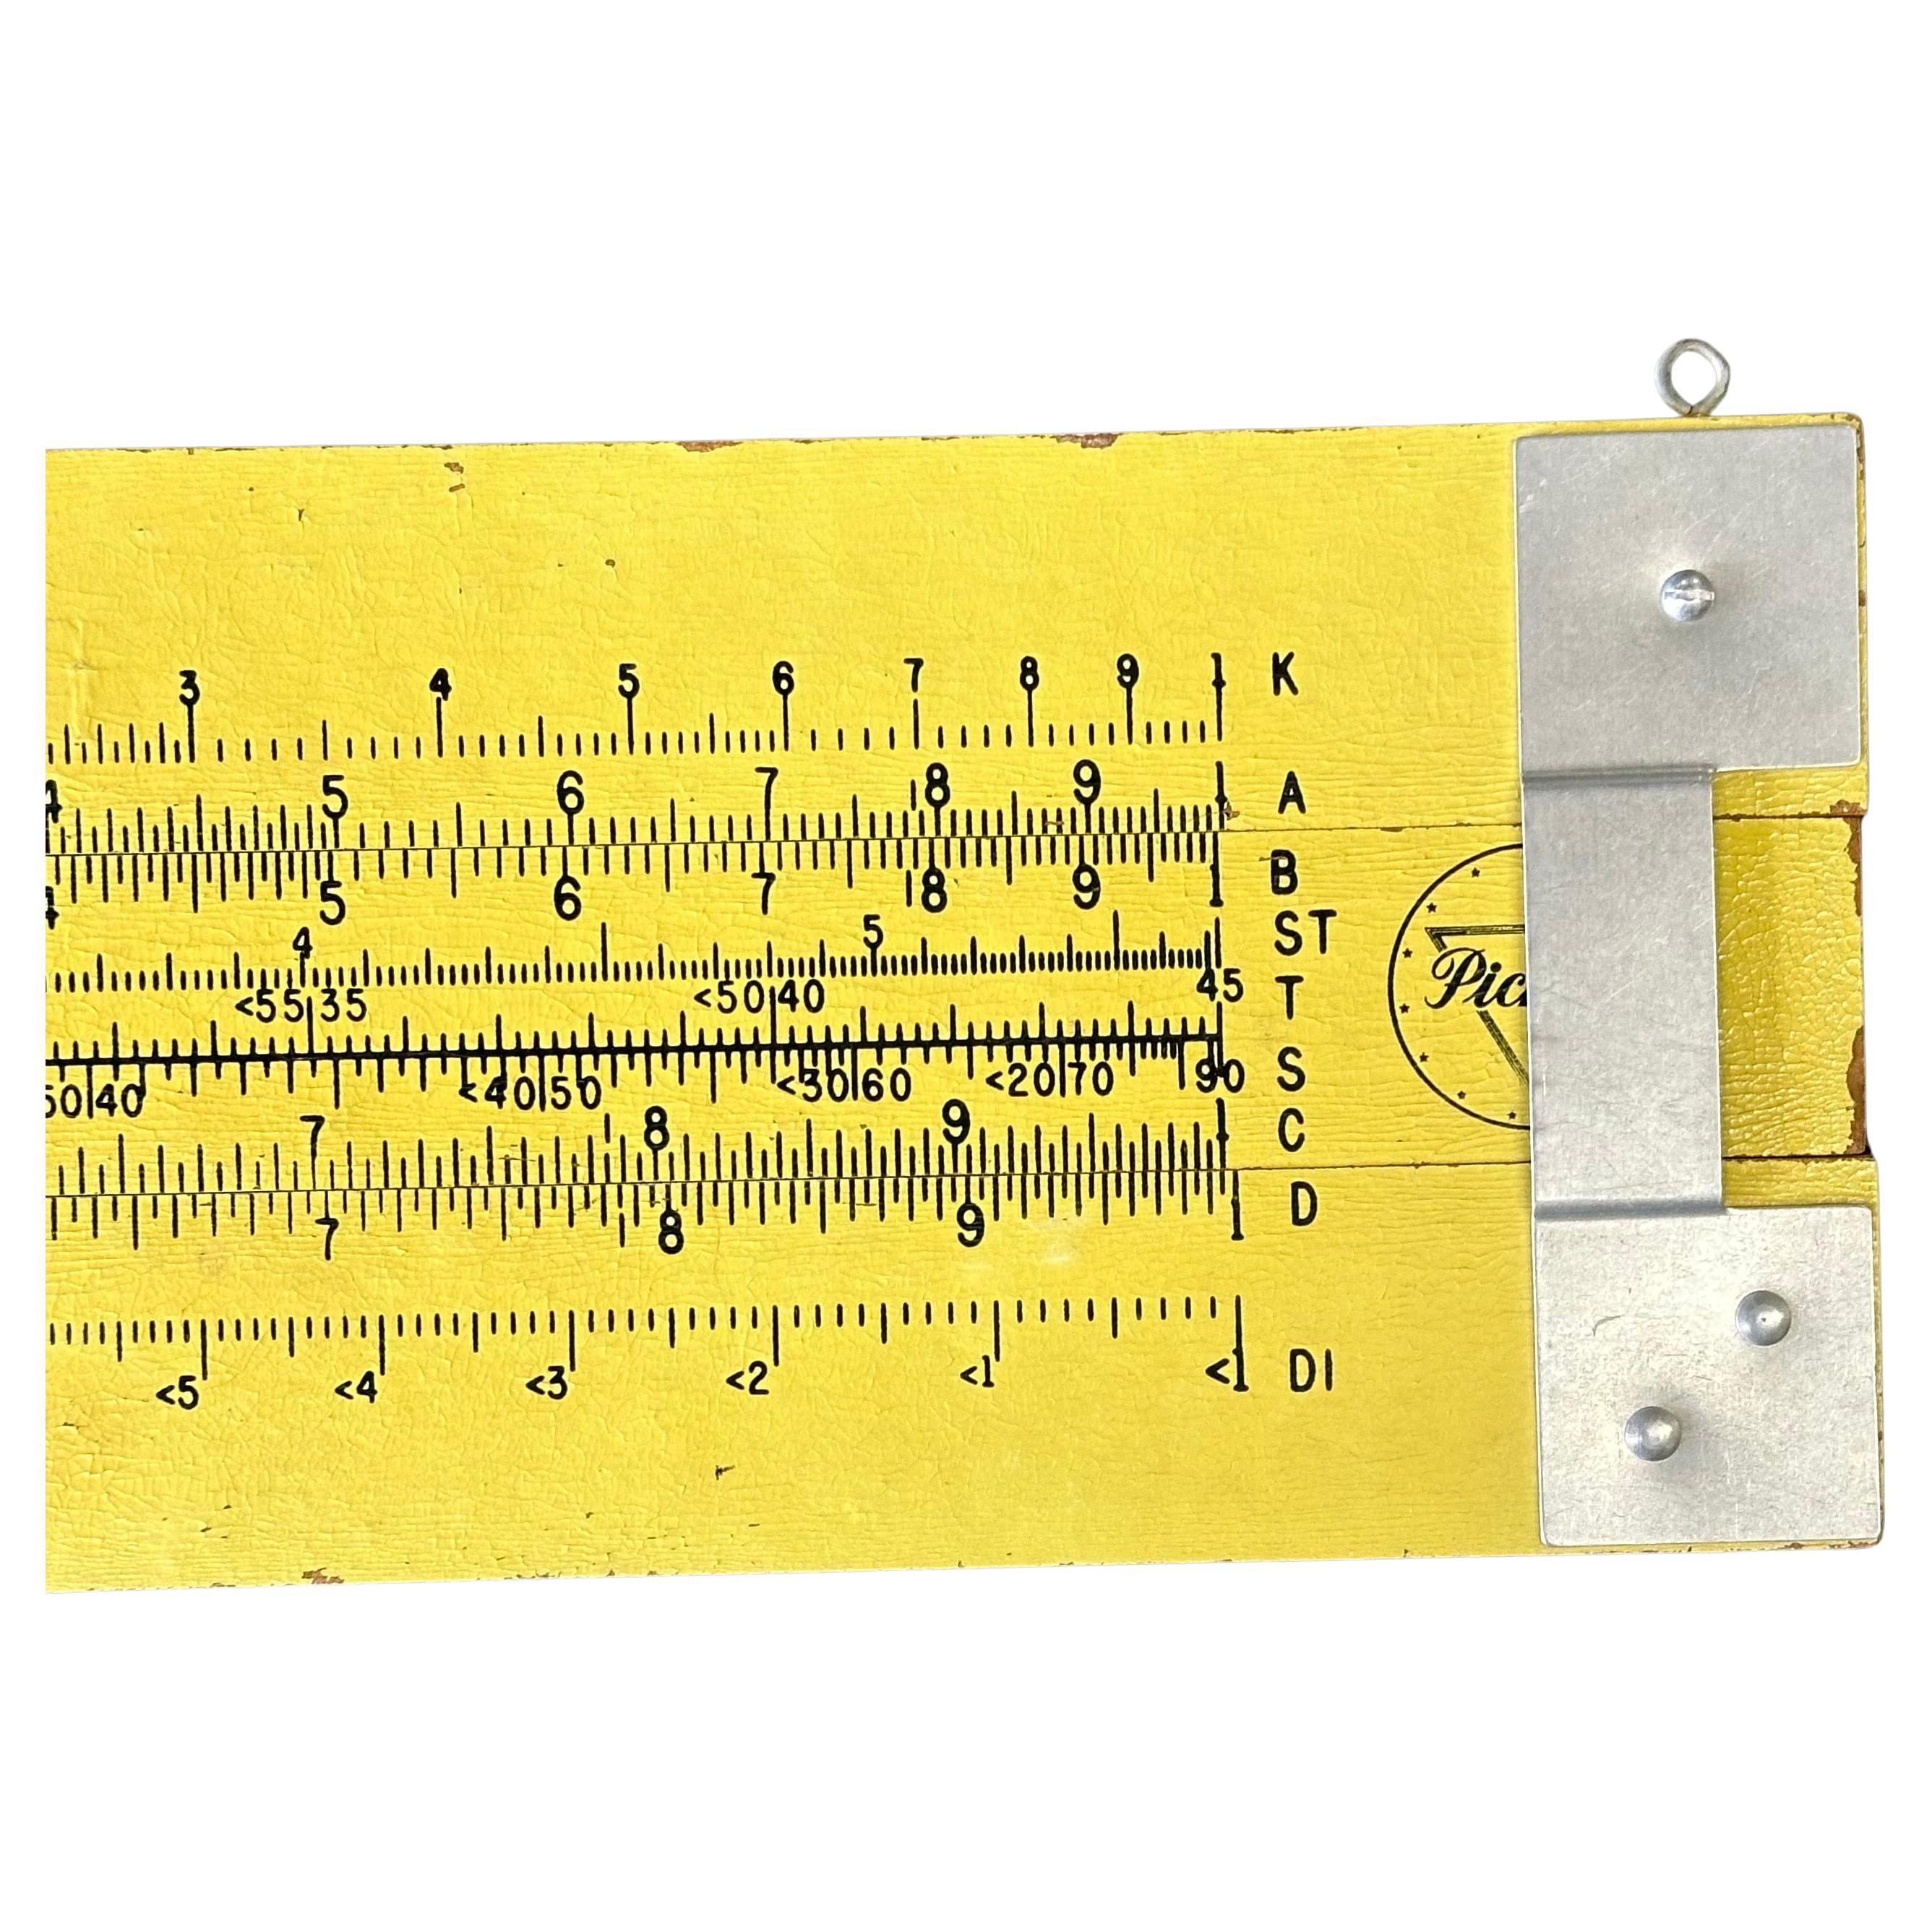 Unique Vintage Oversized 4' Industrial Slide Rule by Pickett In Good Condition For Sale In San Diego, CA